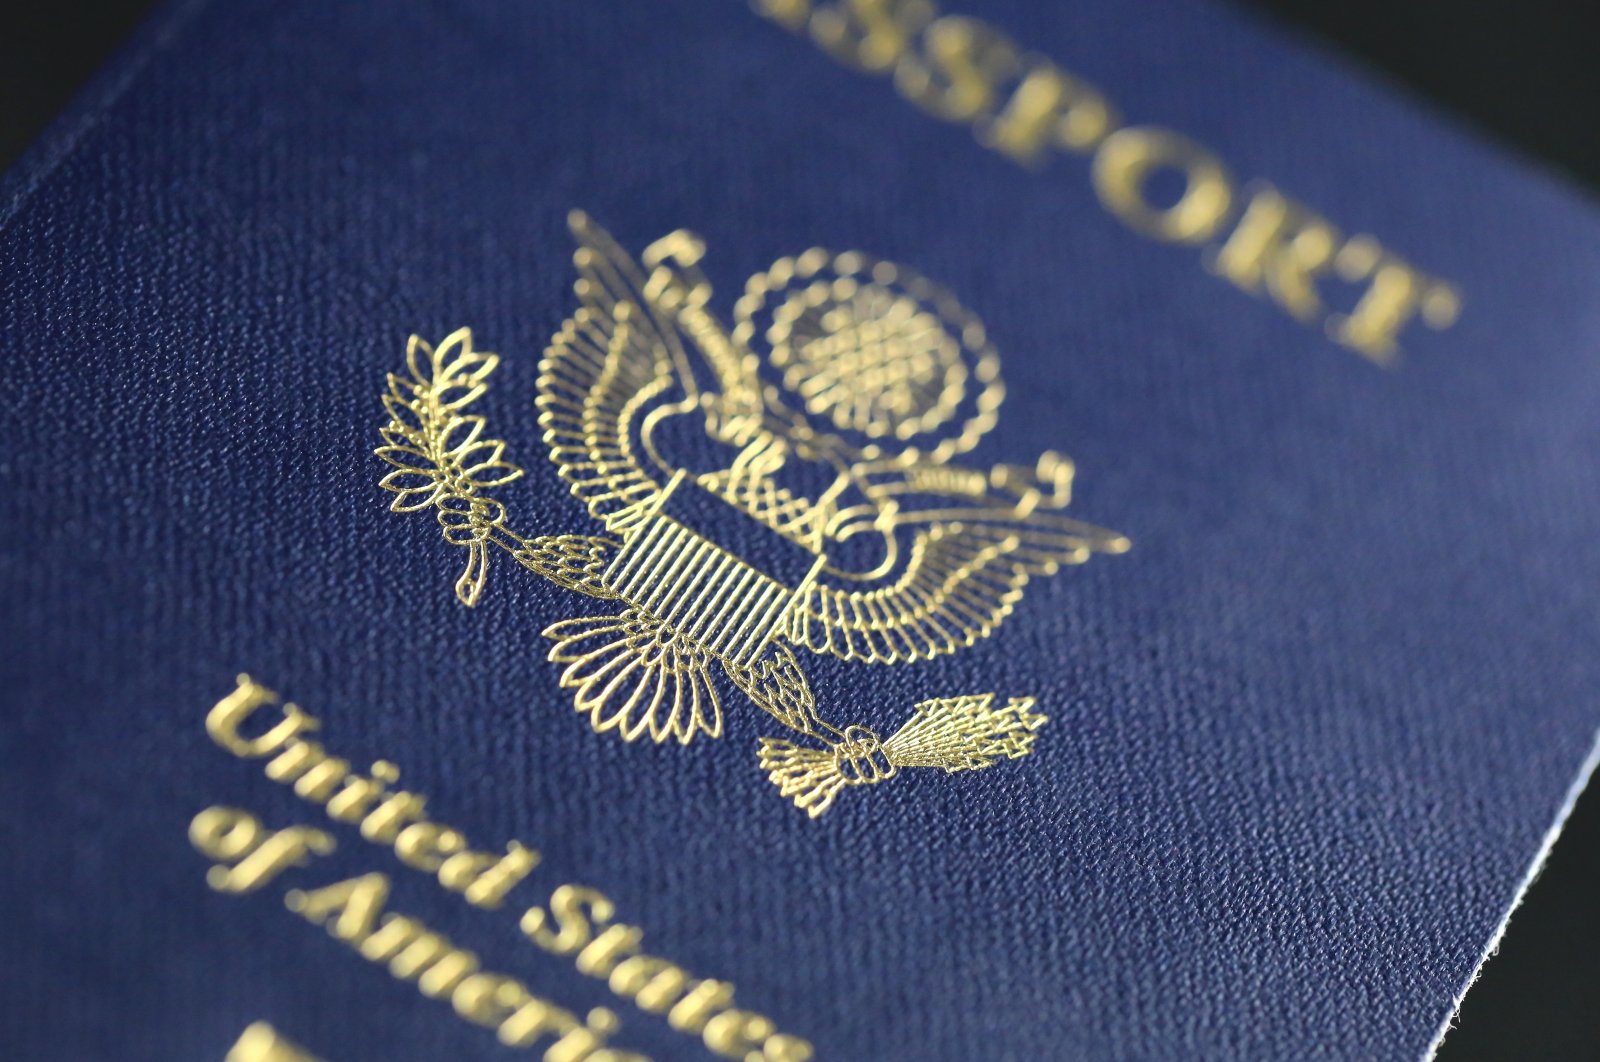 A photo showing a U.S. passport. (Photo by Gettyimages)